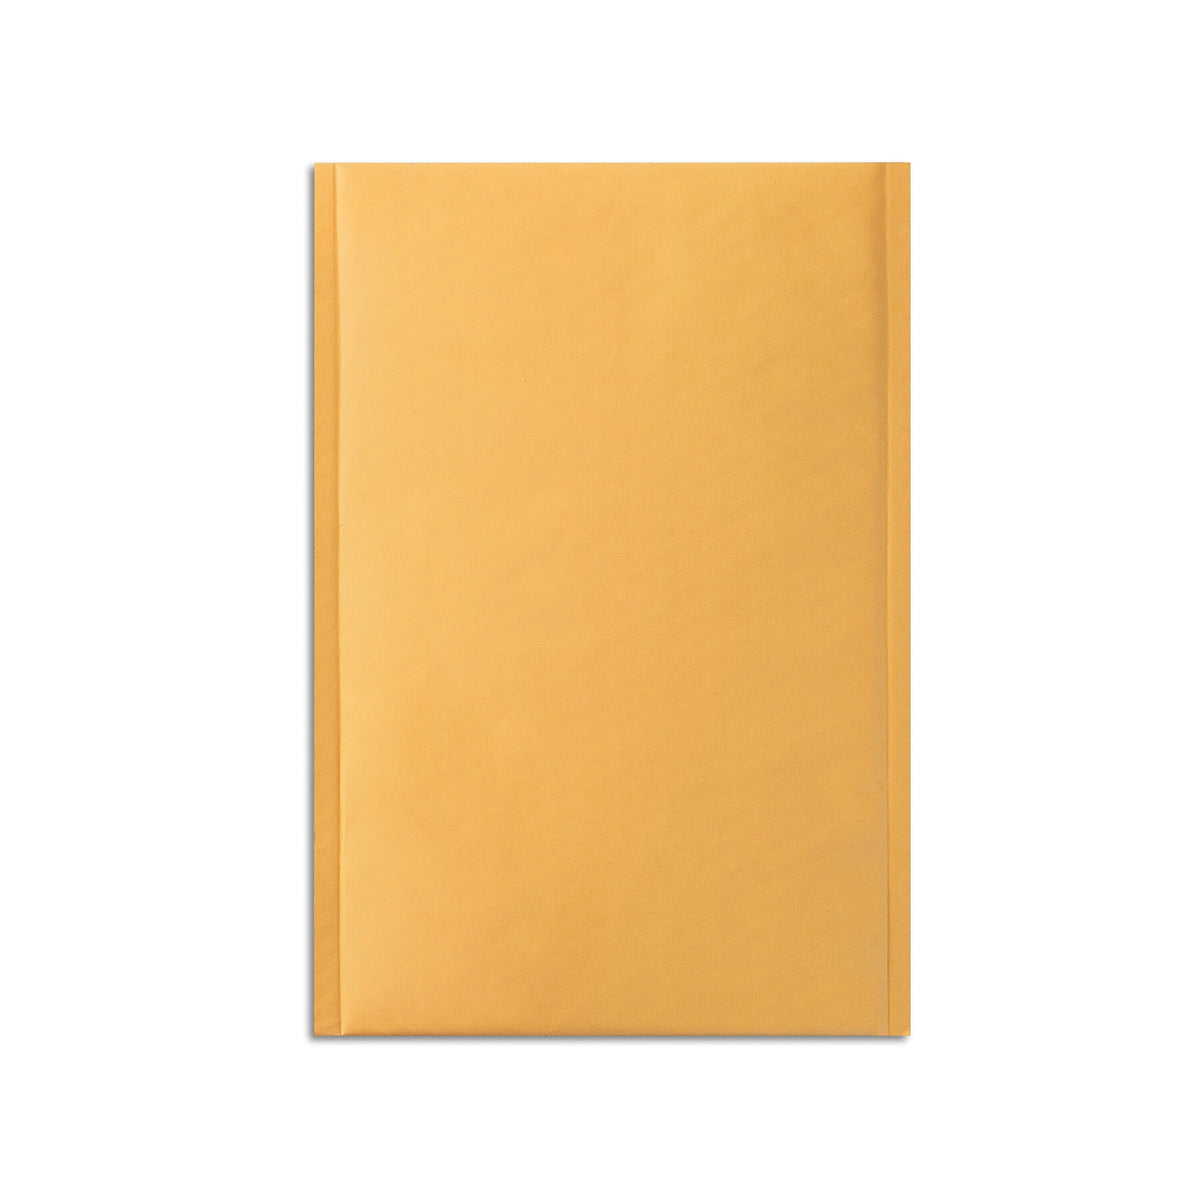 11.25" x 15" Self-Sealing Bubble Mailer, #5, 12/Pack